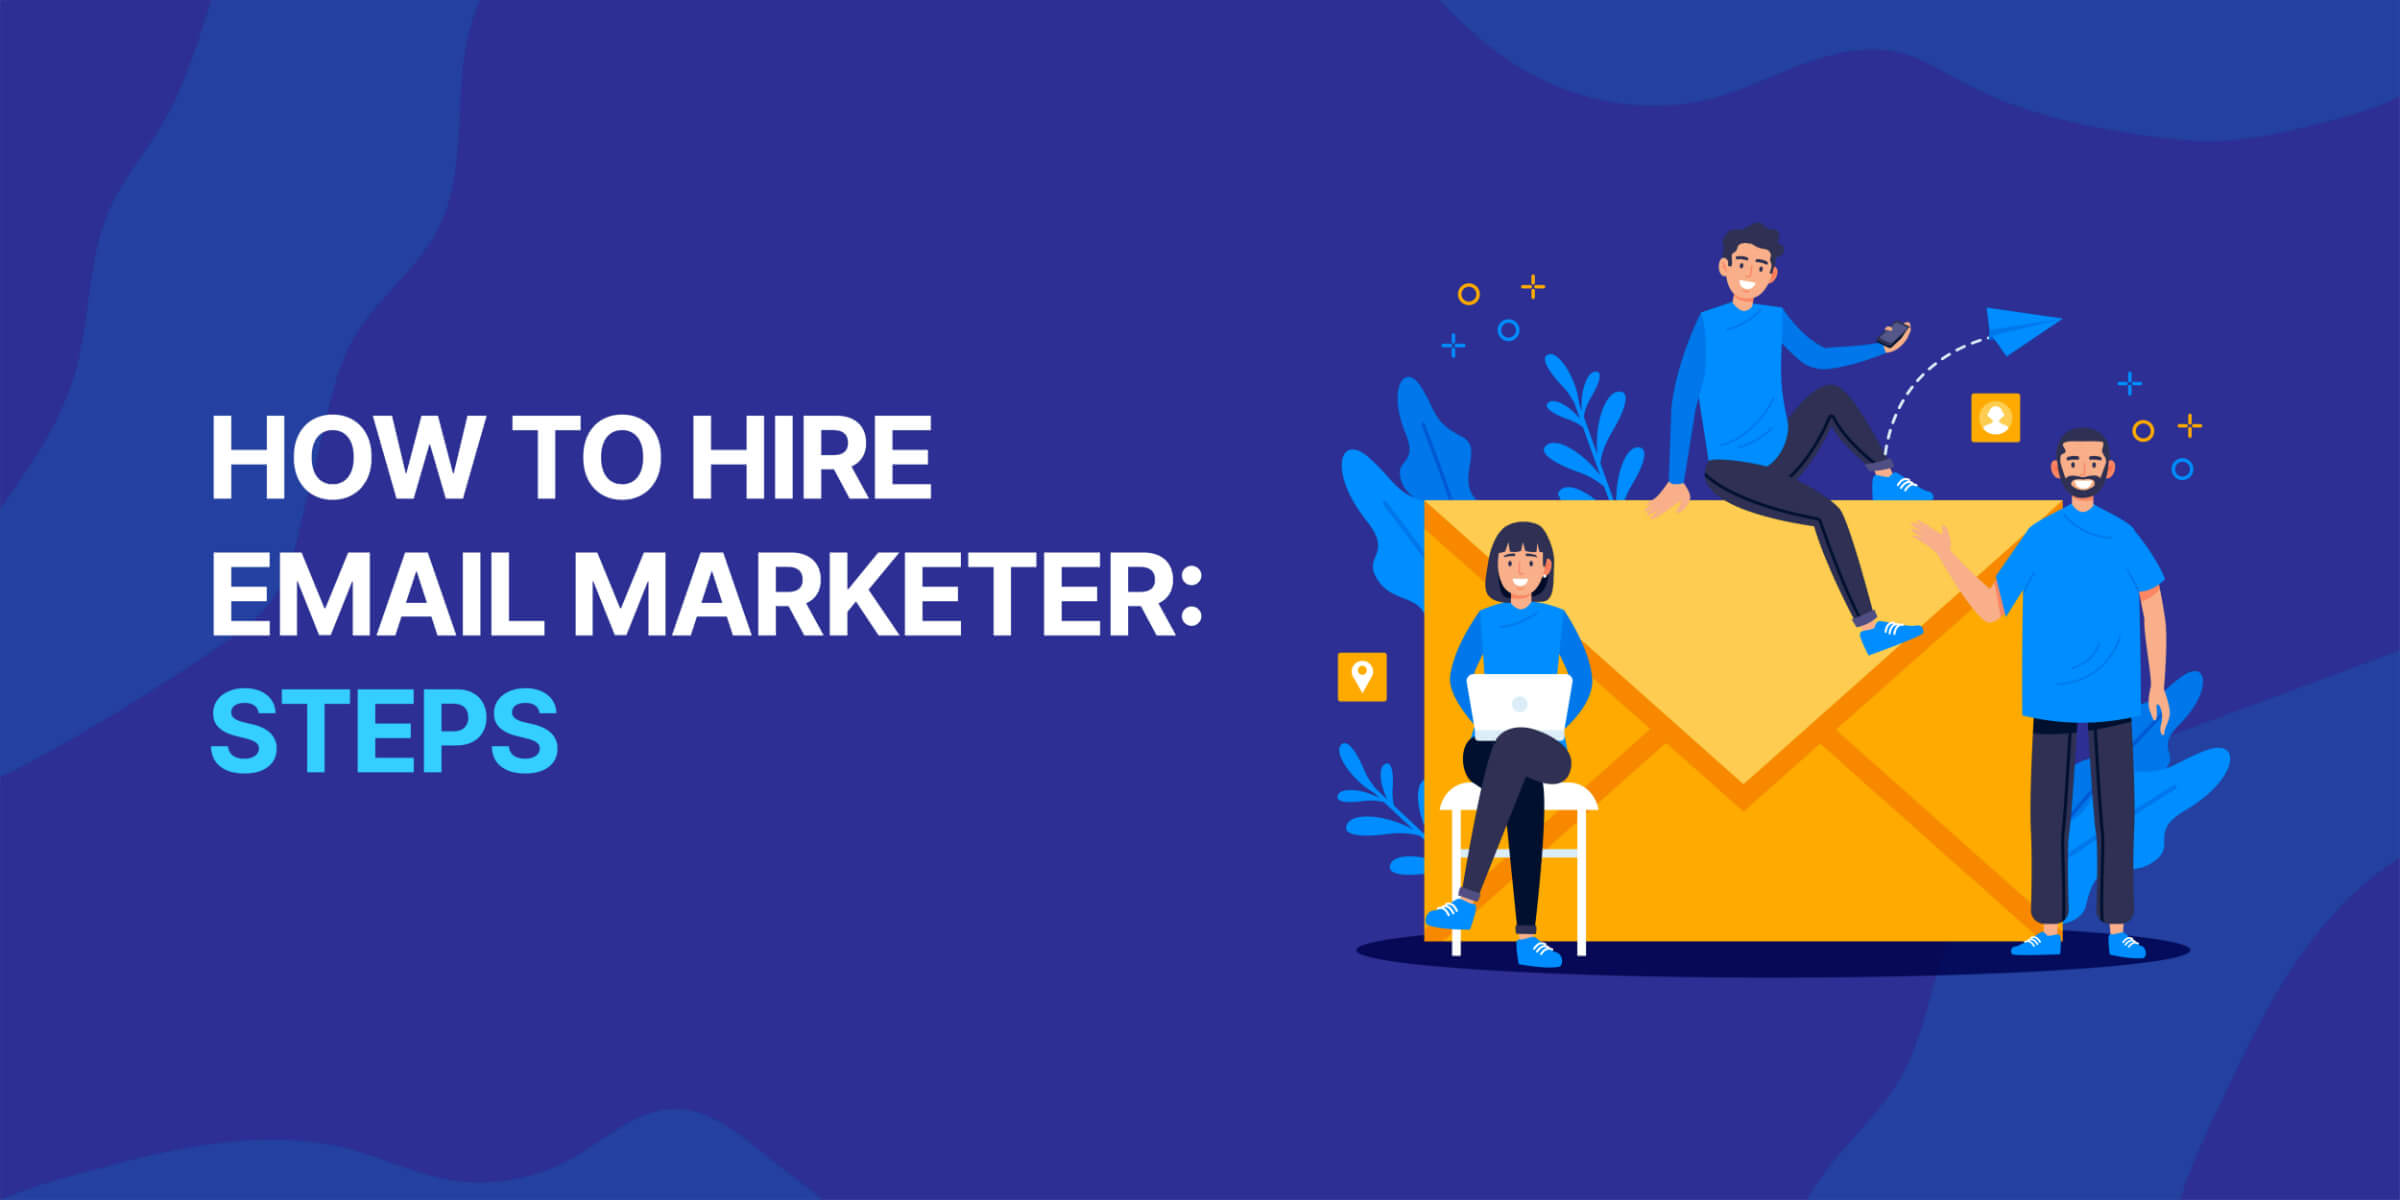 How to Hire Email Marketer Steps